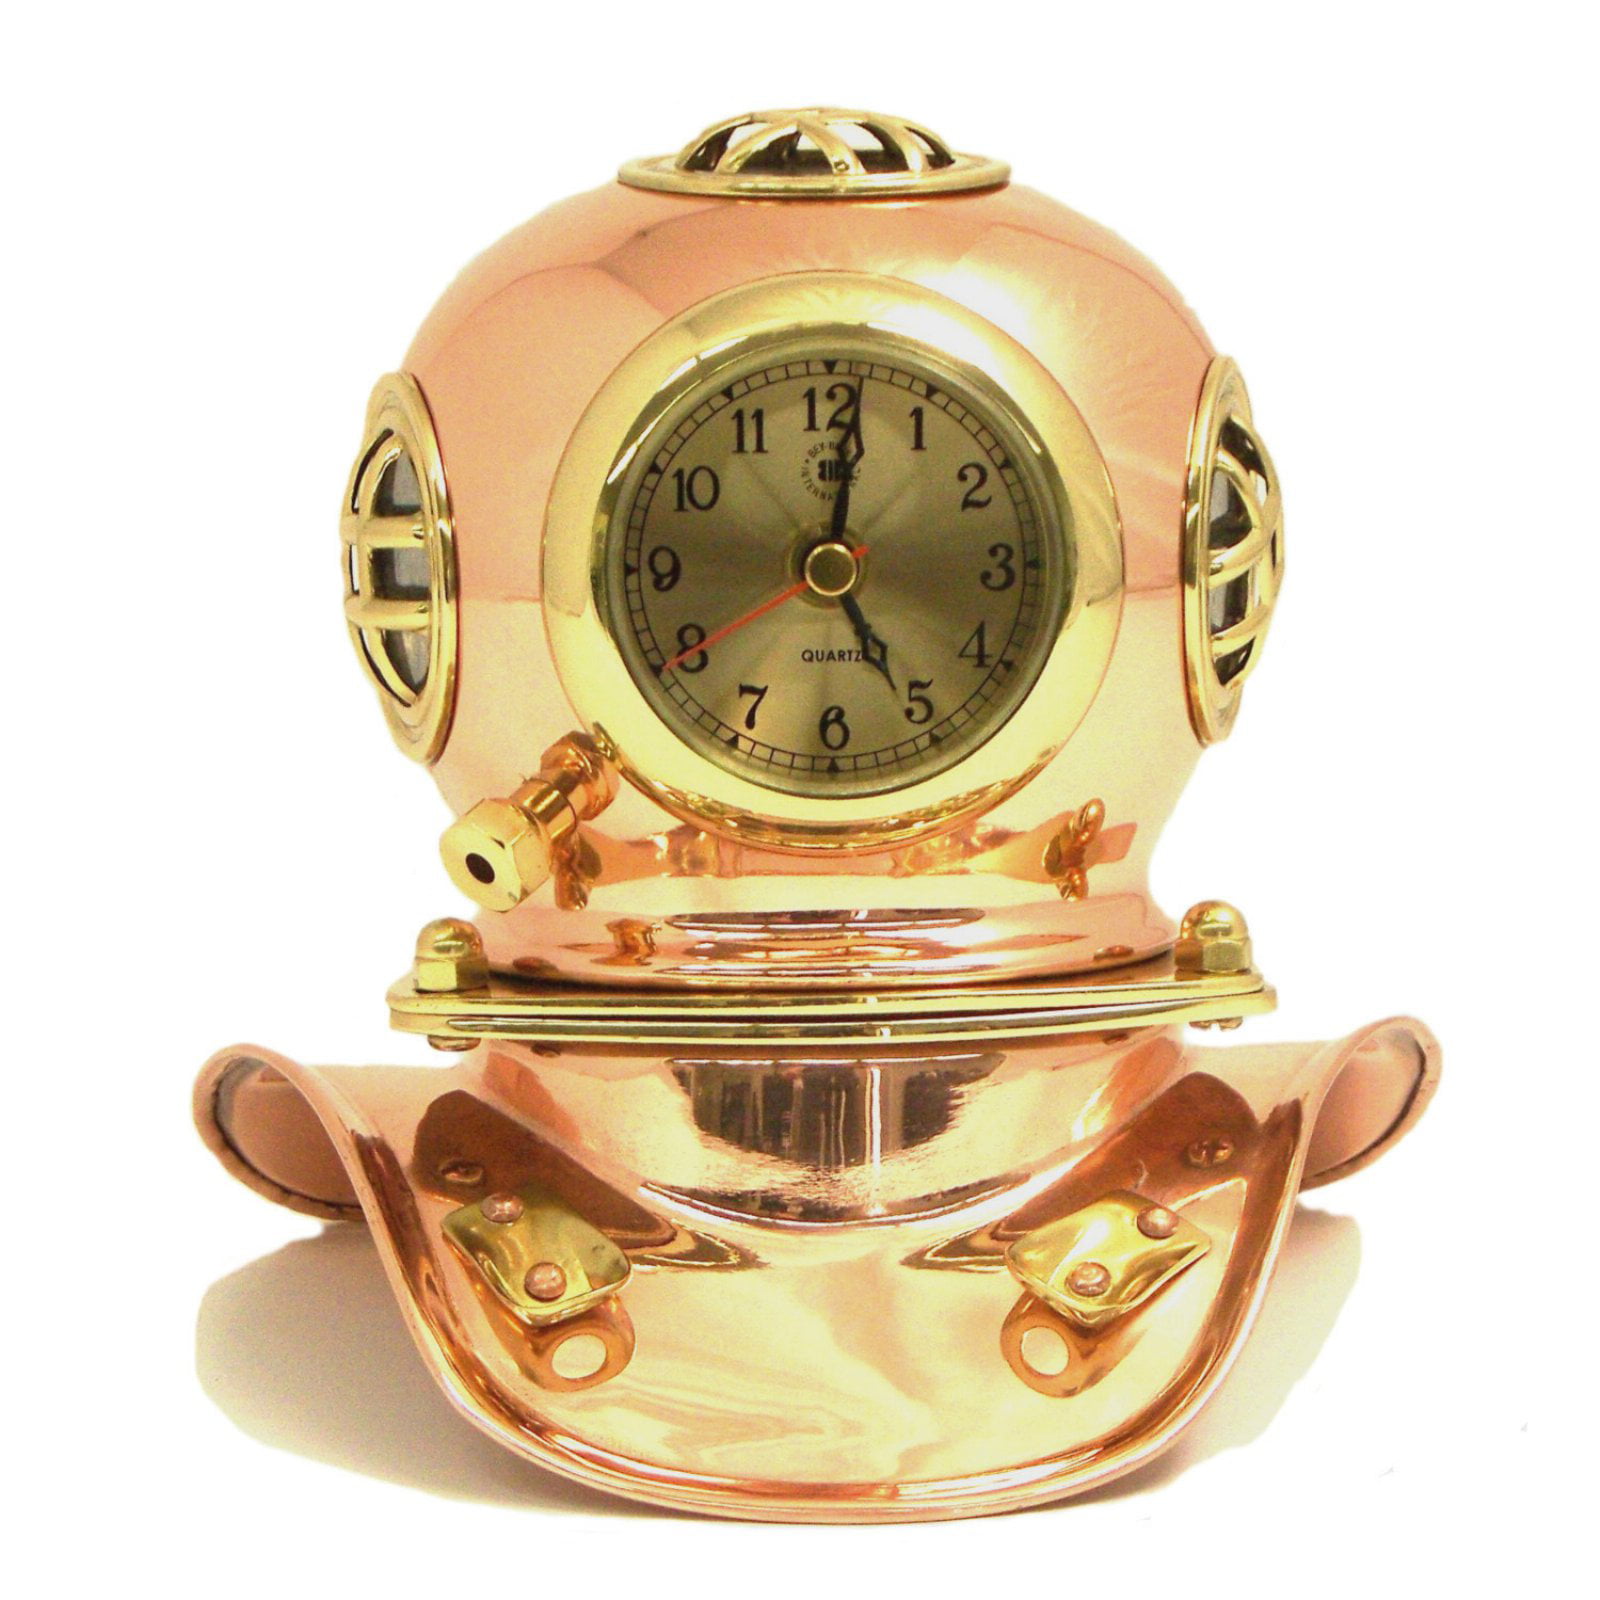 Details about   U.S Navy Clock Mini 8"Divers Diving Helmet Marine Copper And Brass Handmade Gift 